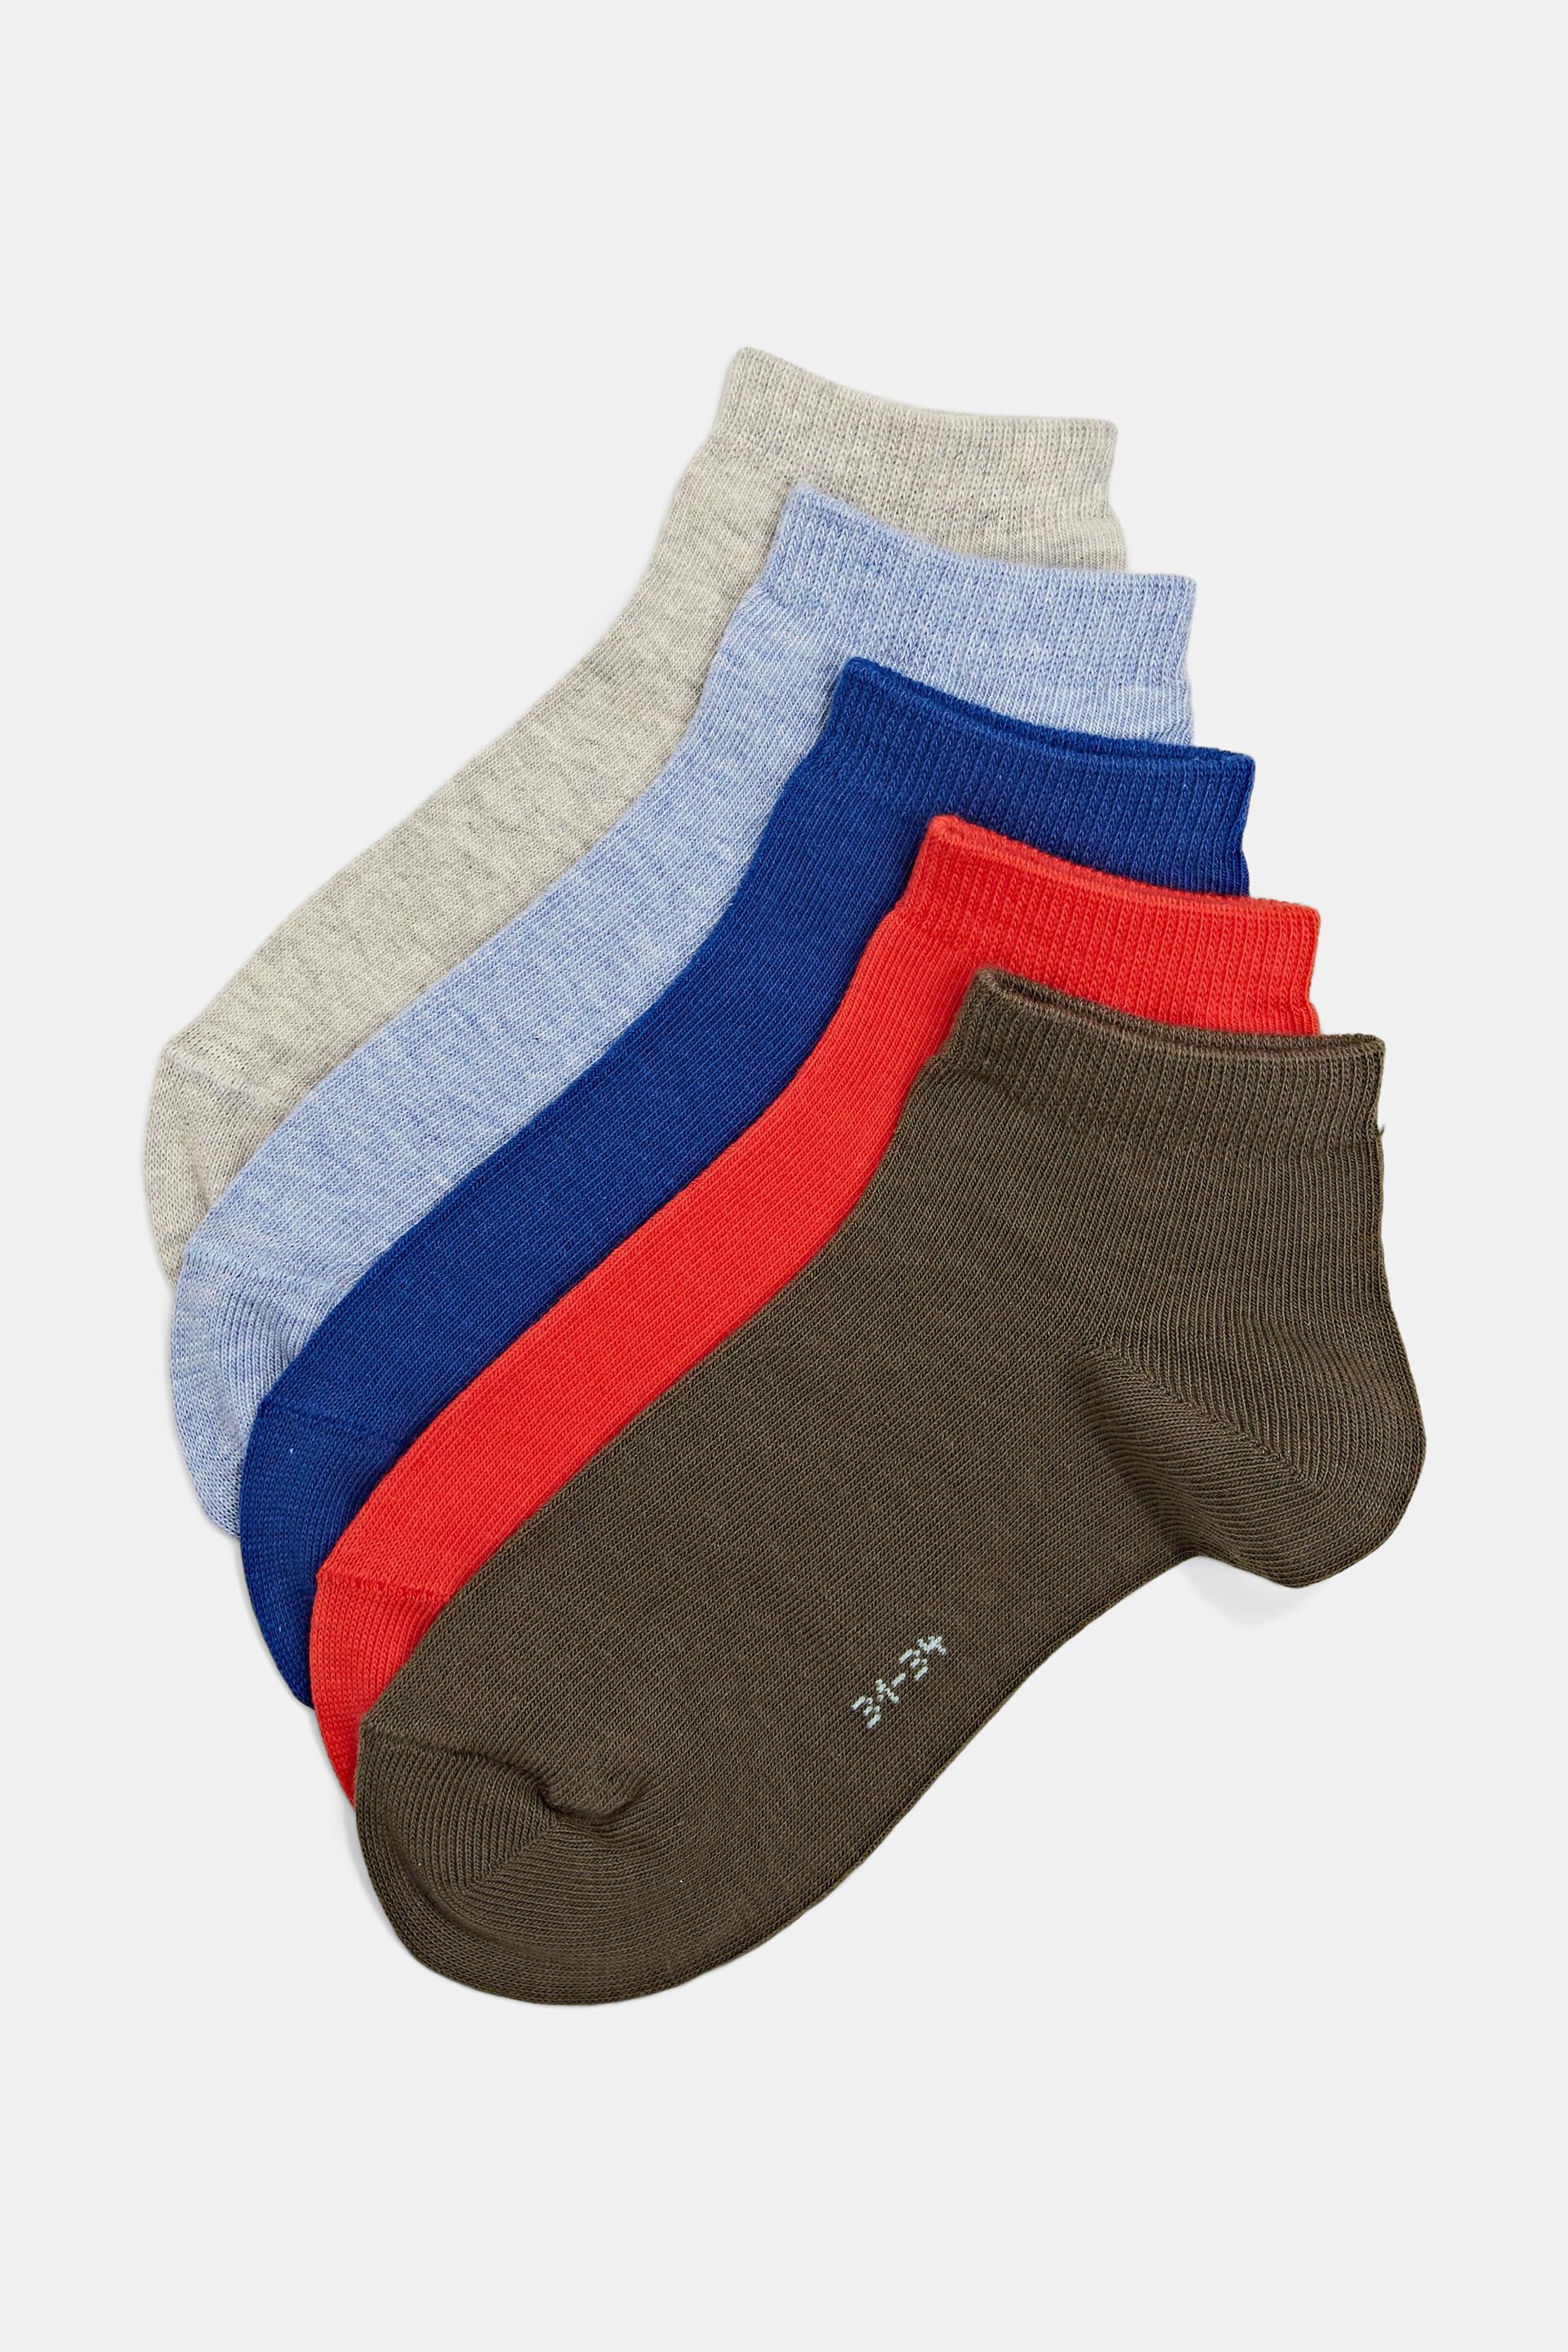 Esprit socks, of plain-coloured Pack an cotton in pairs 5 blend organic